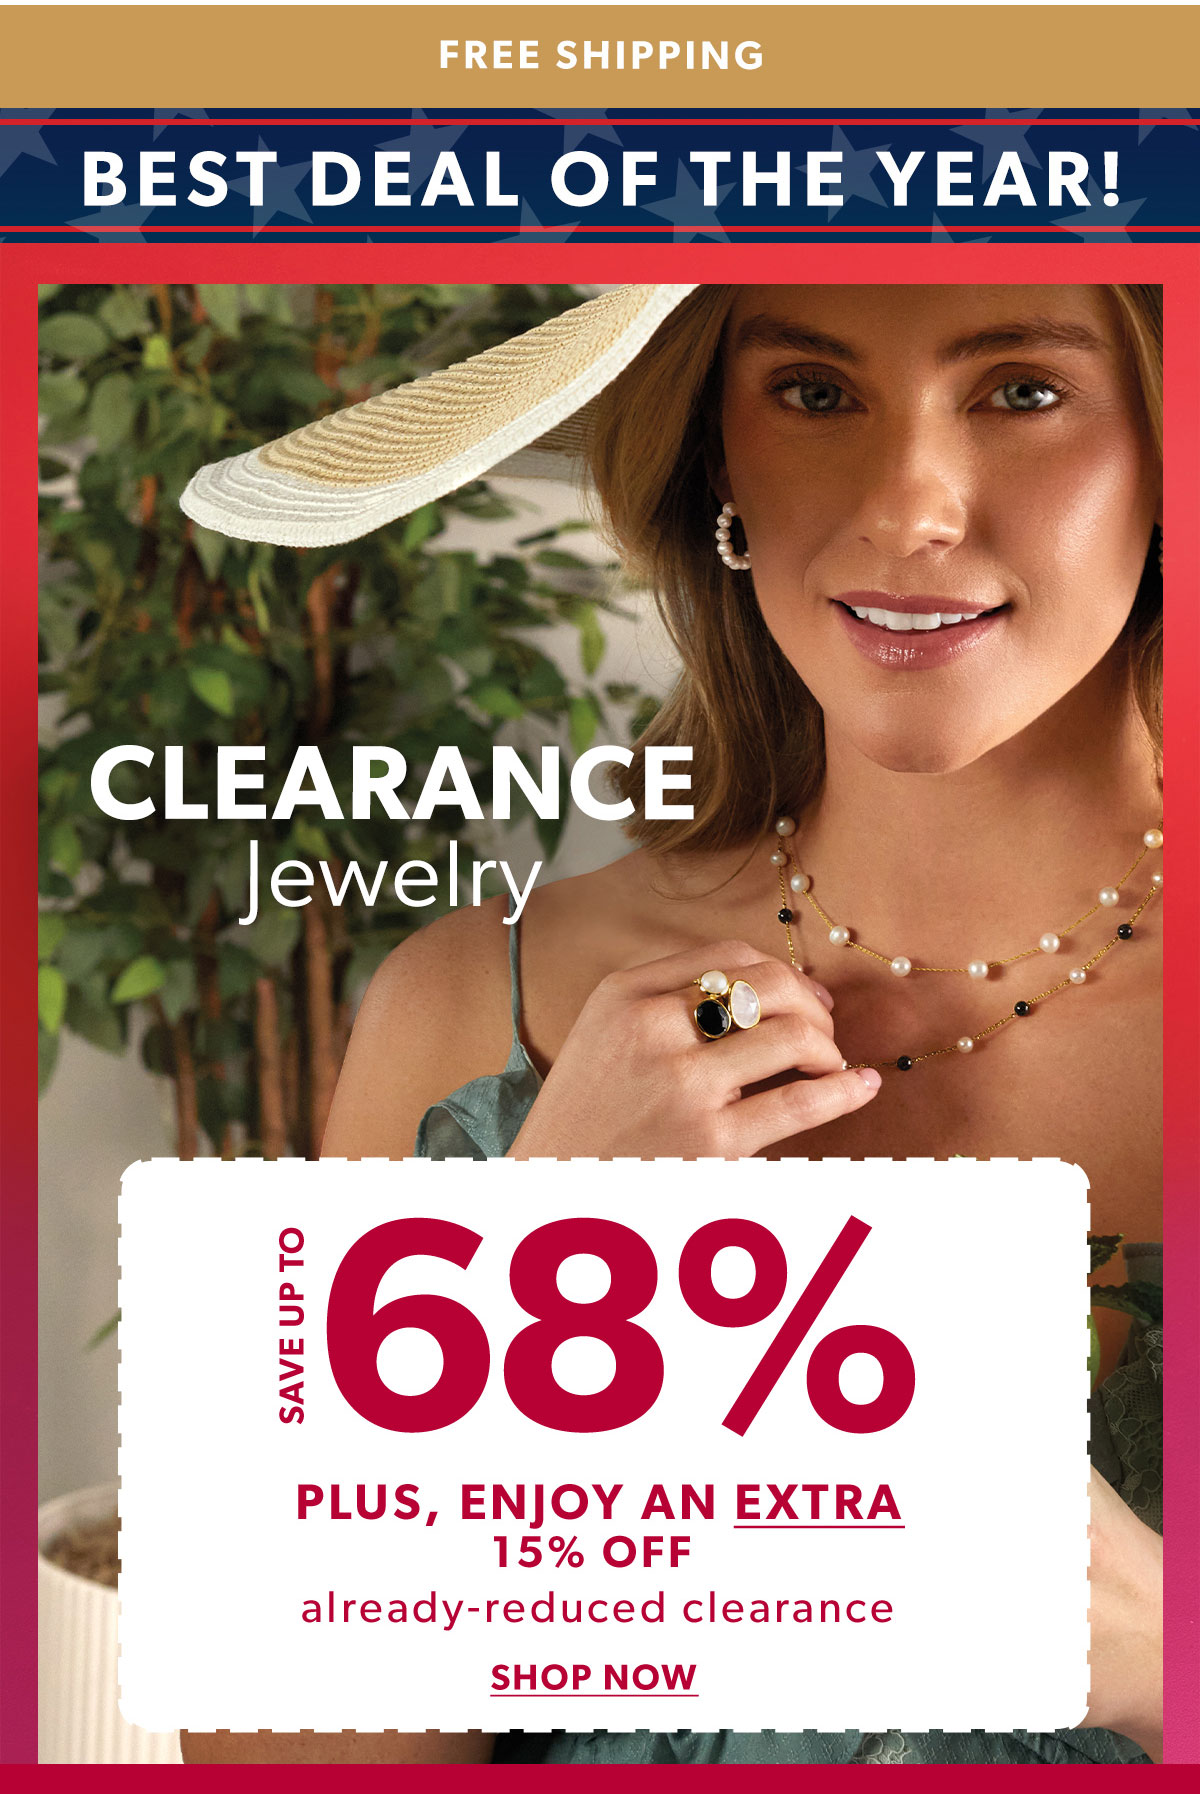 Save Up To 68% Plus, Enjoy an Extra 15% Off Already-Reduced Clearance. Shop Now